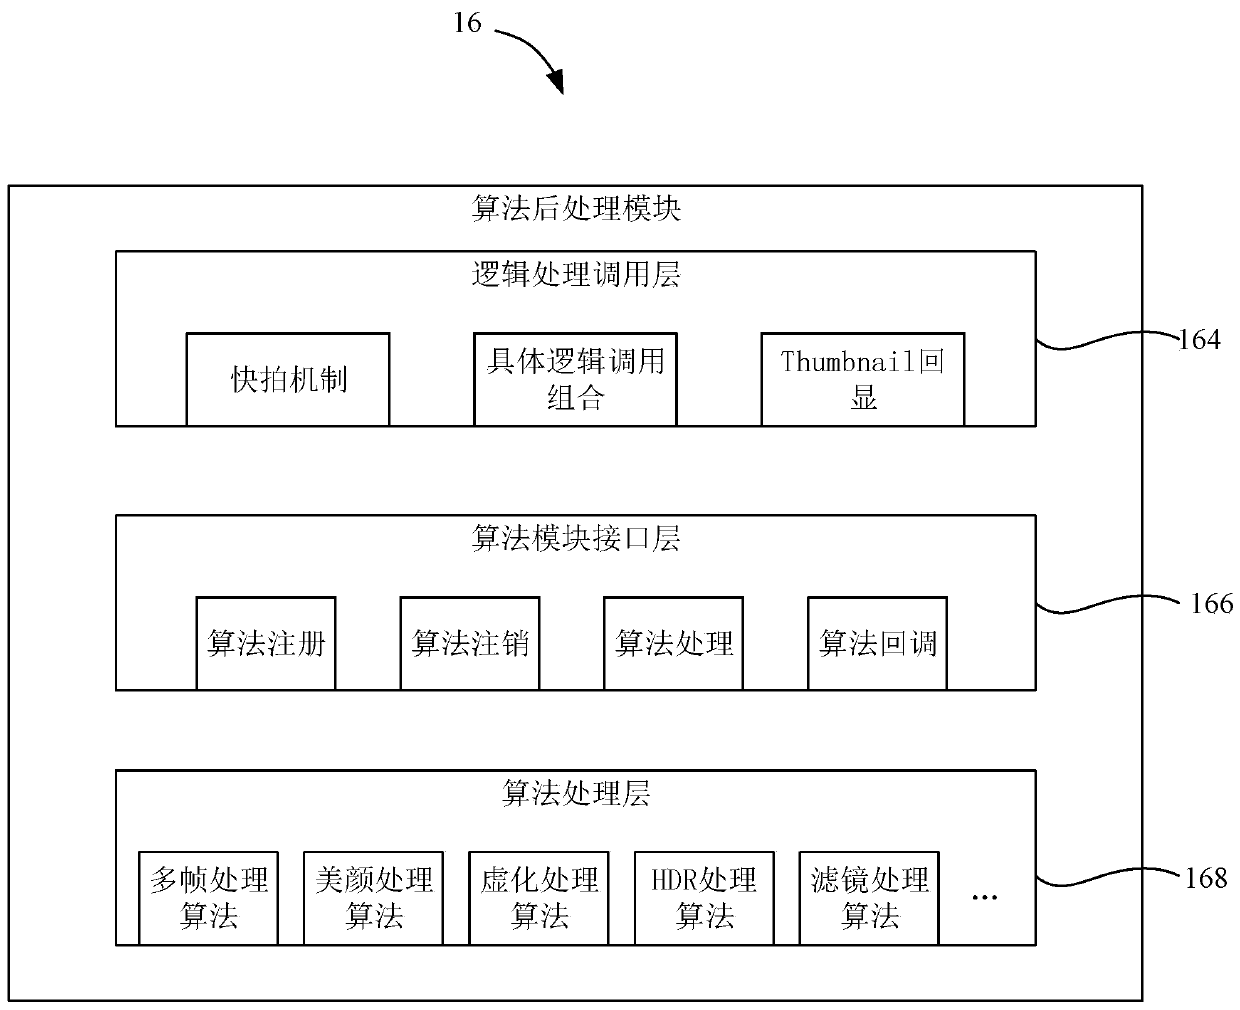 Image processor, image processing method, shooting device and electronic equipment